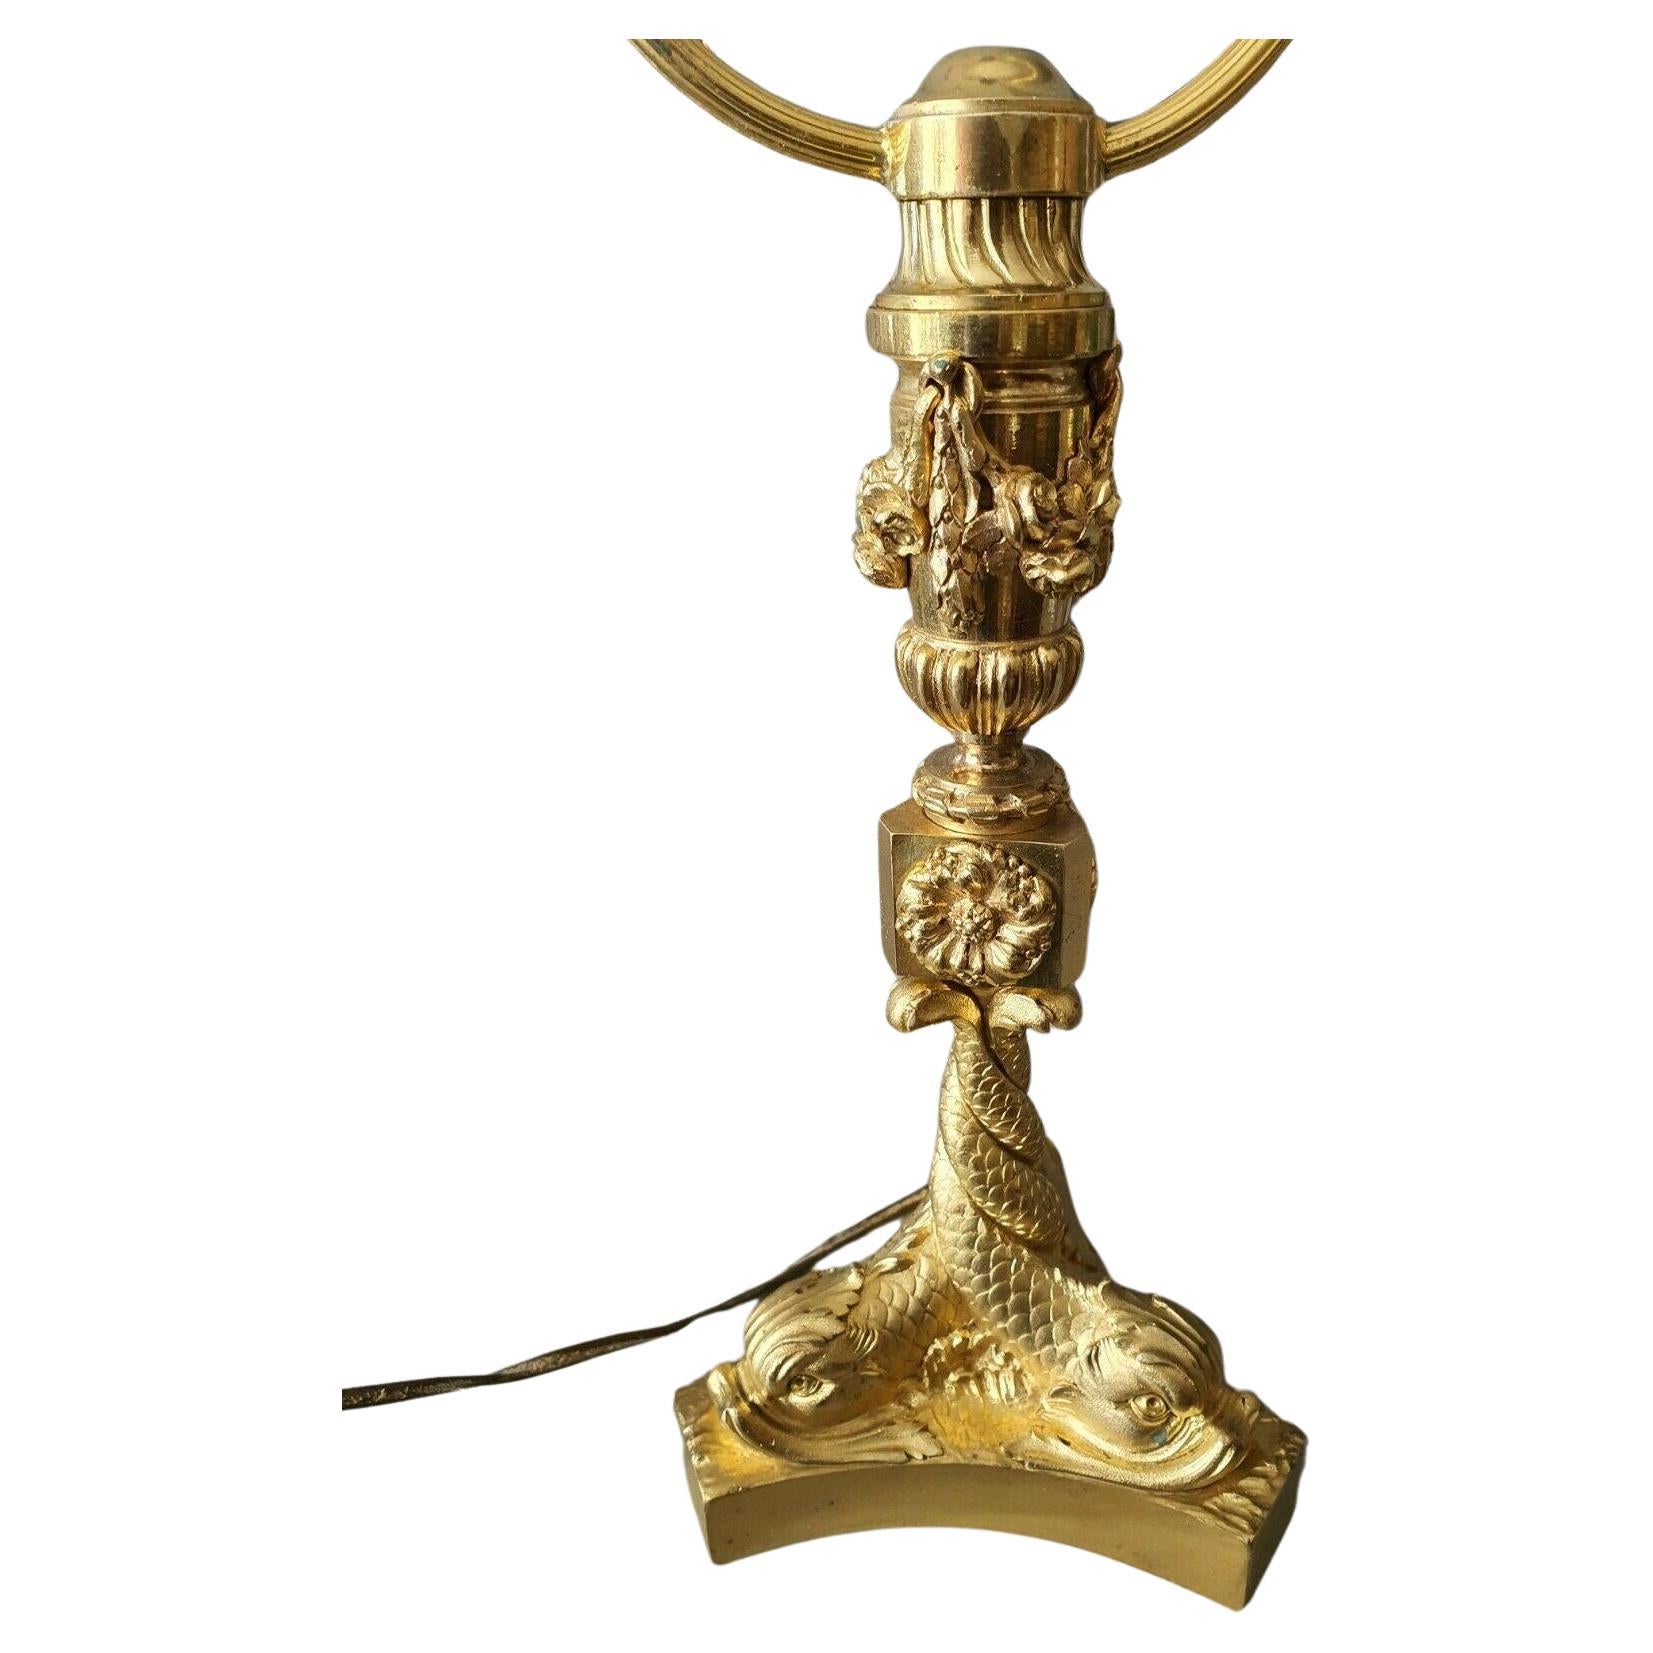 19thc French Louis XV style Gilt Bronze Intertwined Dolphins/ Sea Creatures/ Fish Table Lamp. This lamp has great detail and shows beautifully.